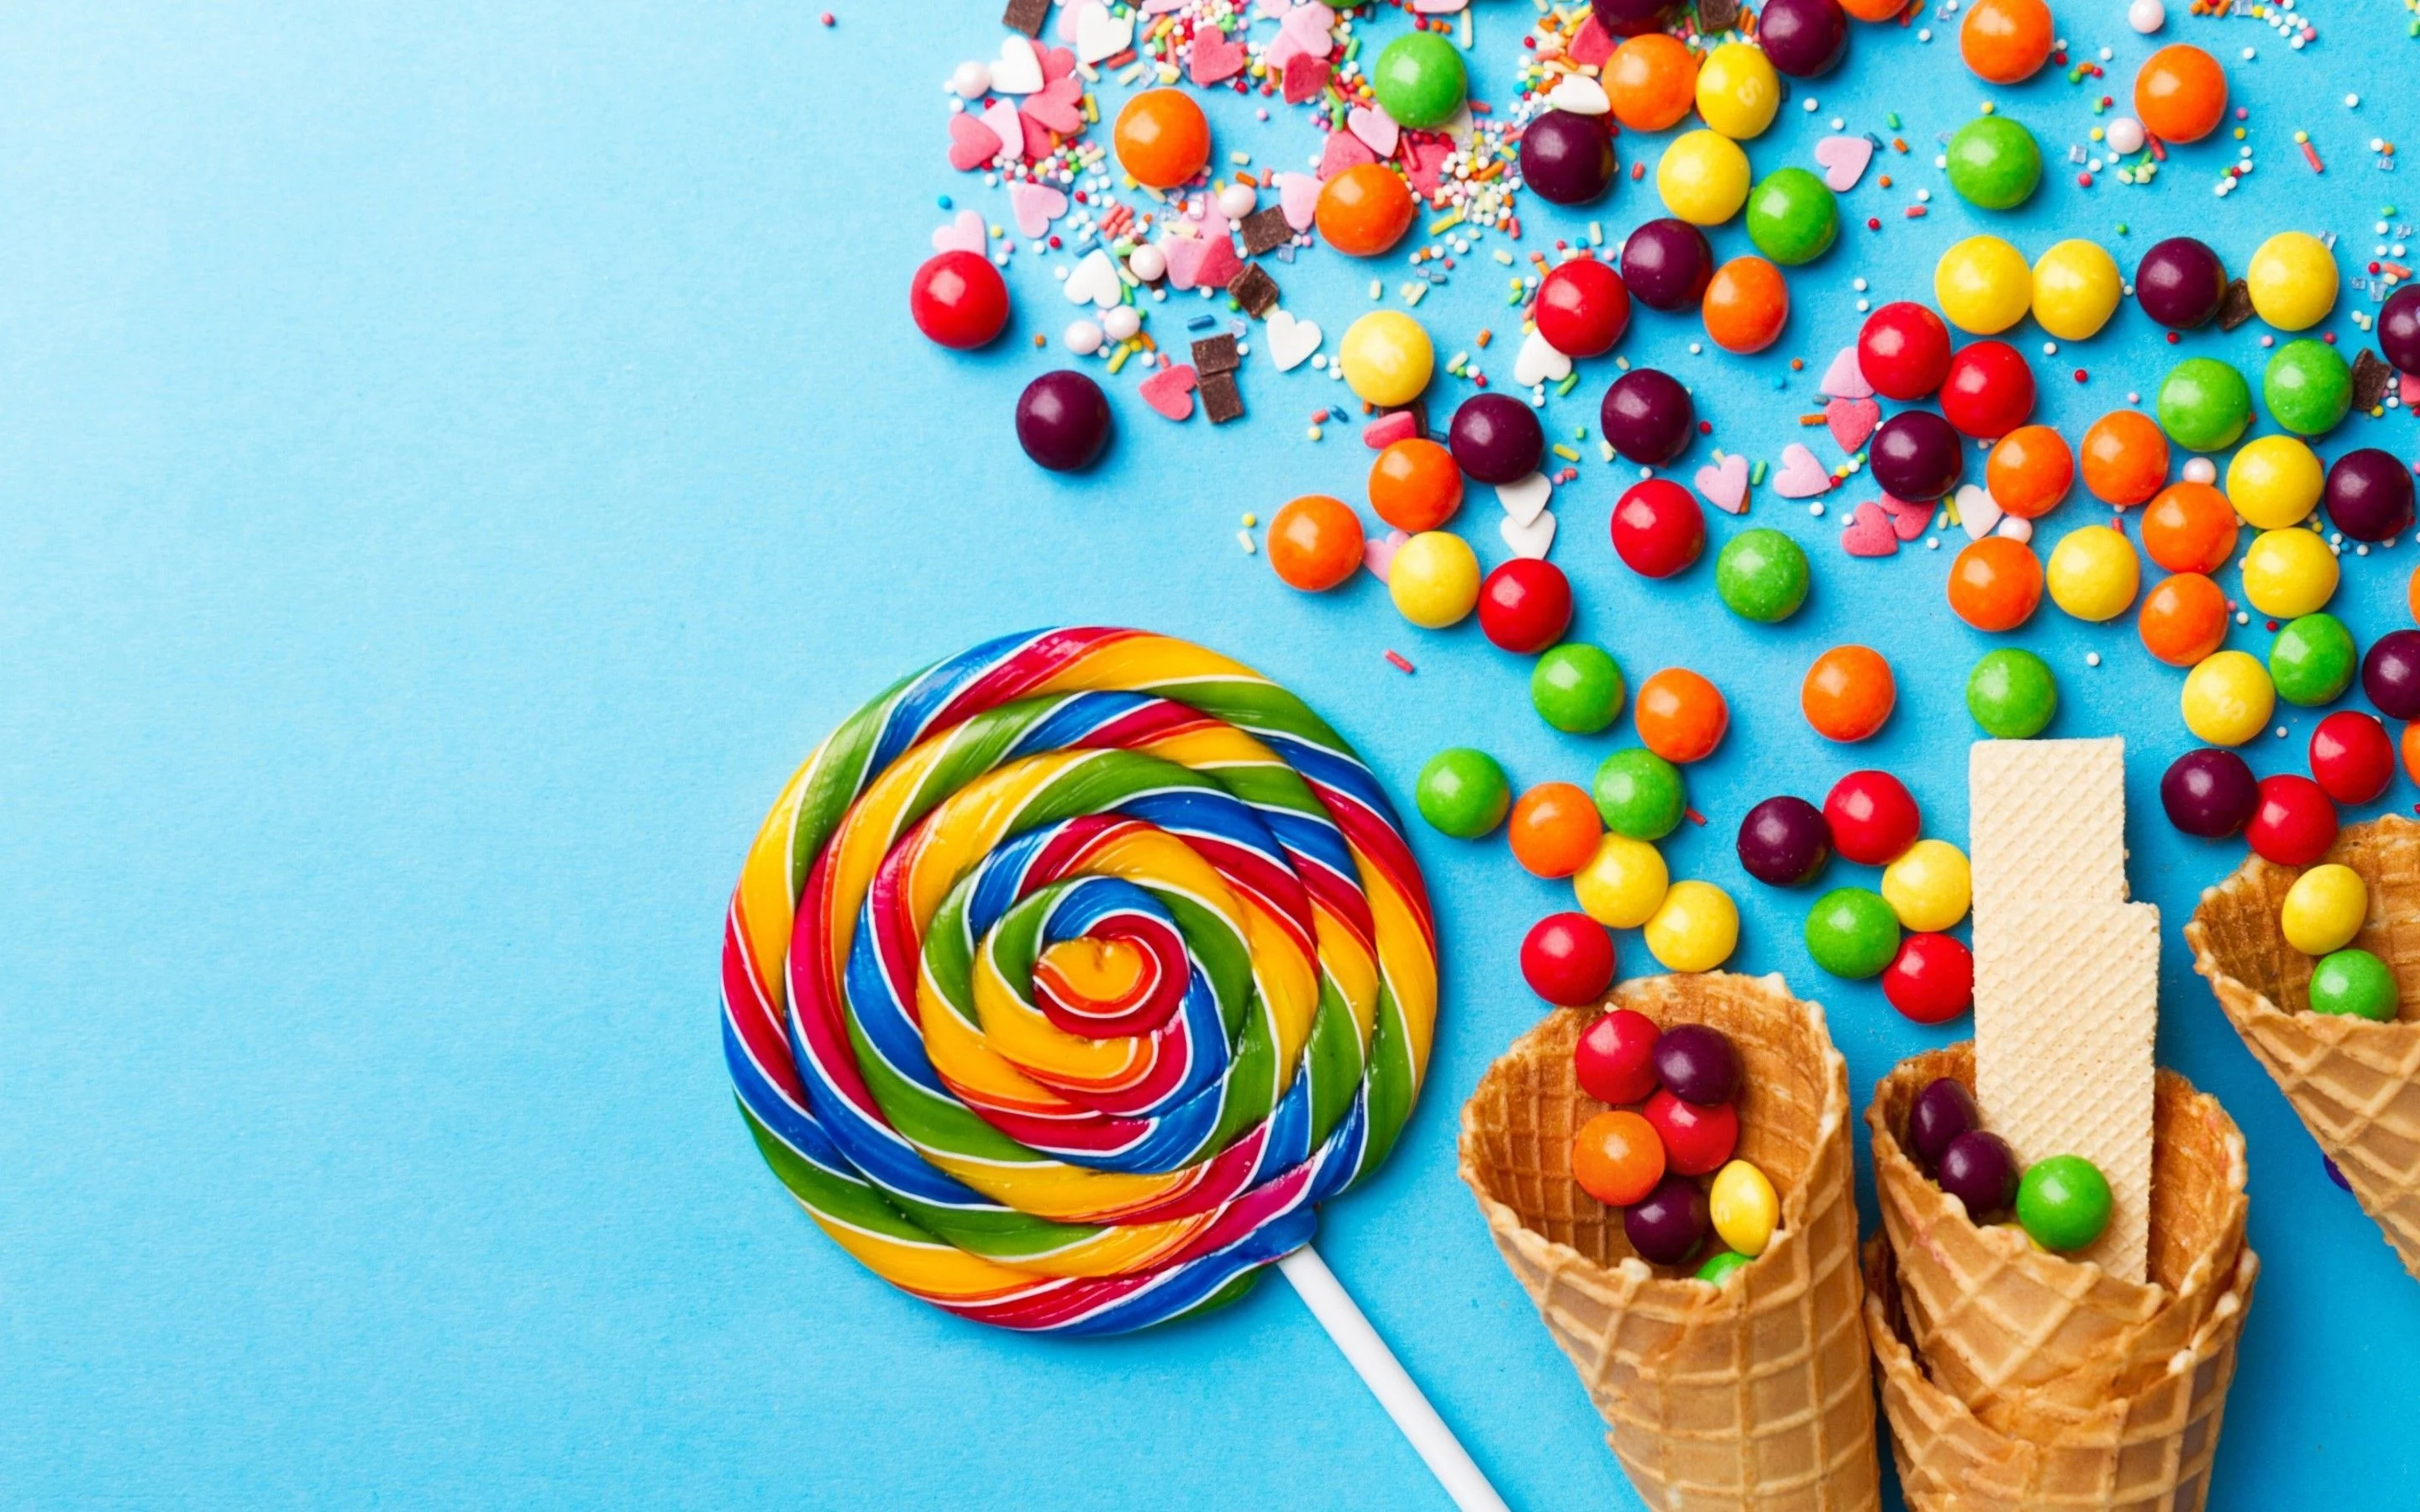 Candy laptop wallpapers, Sweet and colorful, Eye-catching designs, Sugary inspiration, 2880x1800 HD Desktop